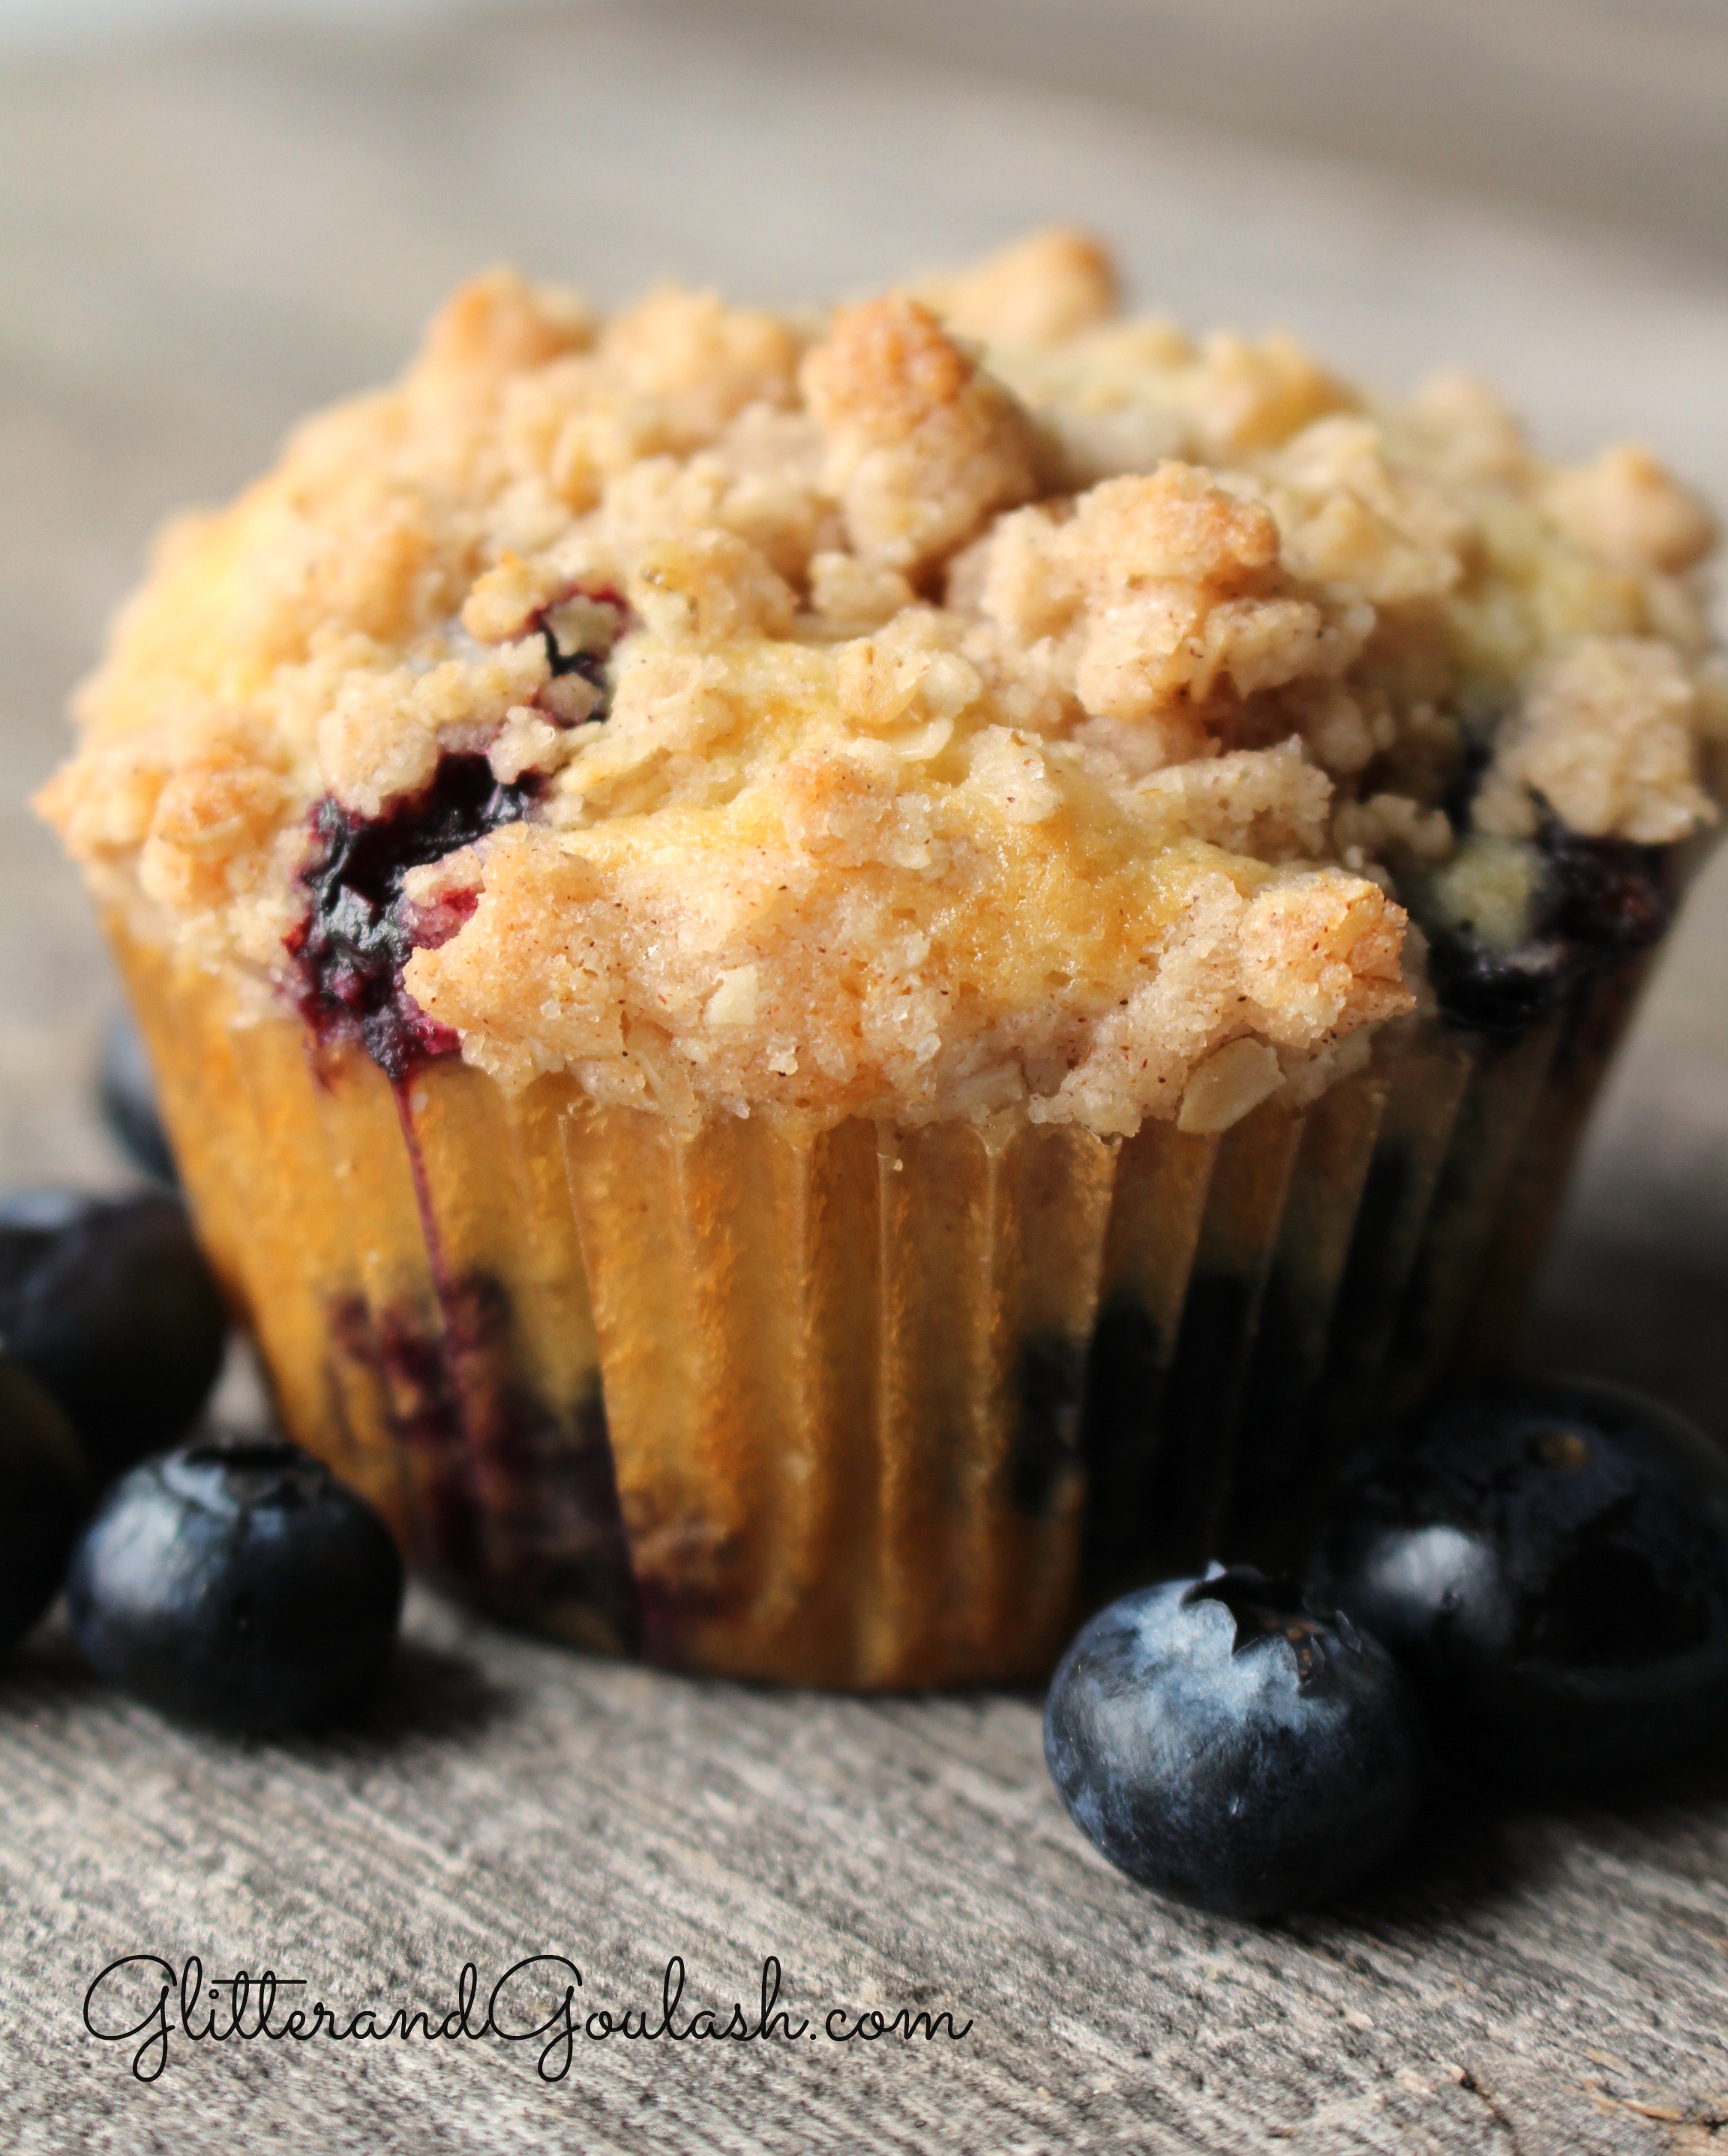 Streusel Topped Blueberry Muffin Recipe - Glitter and Goulash